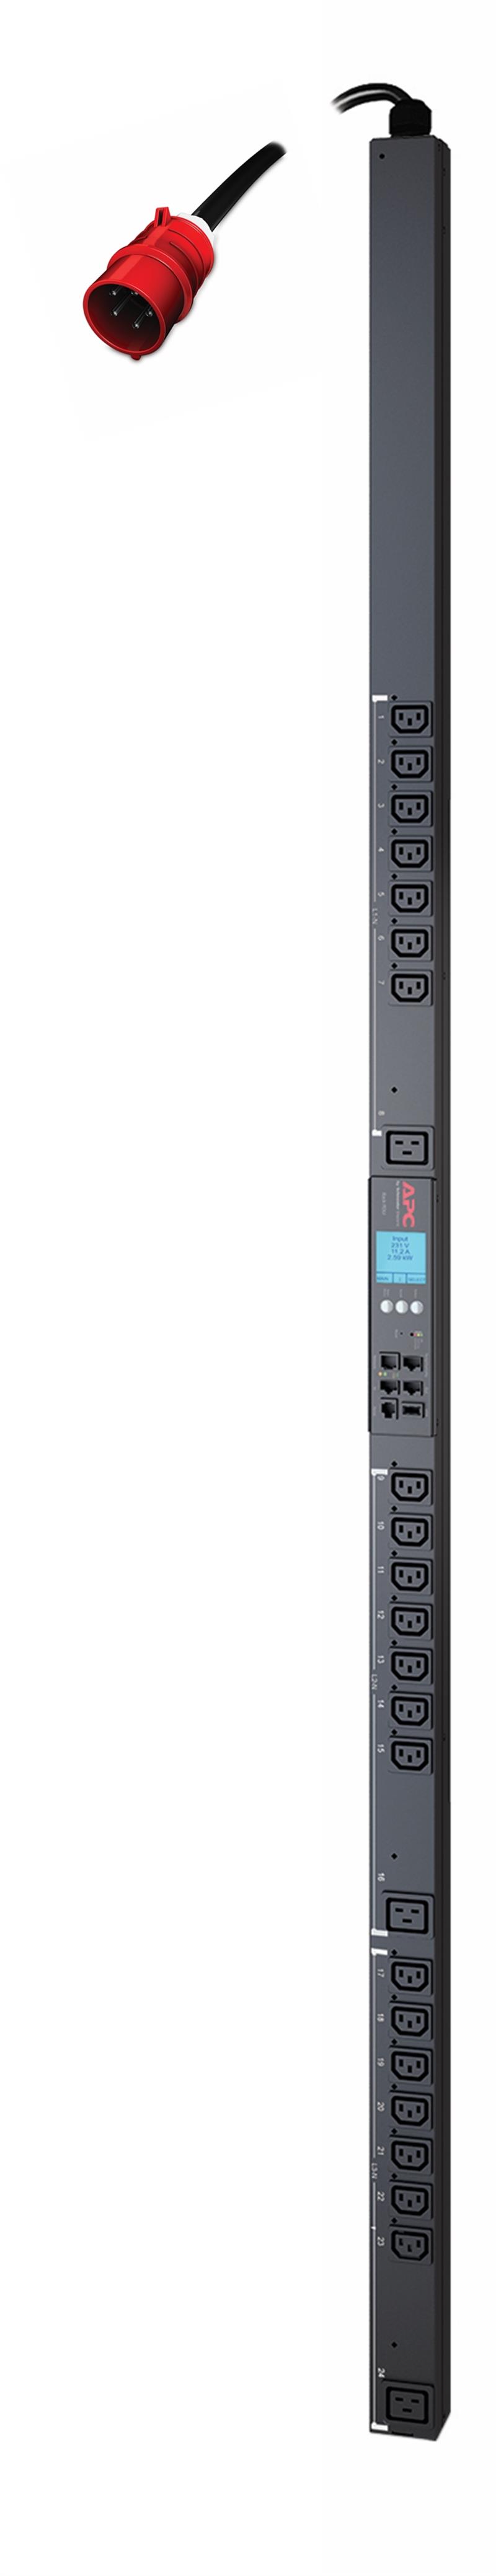 APC Rack PDU, Metered-by-Outlet with Switching, ZeroU, 400V, (21x) C13 & (3x) C19, IEC 309 16A 3Fase stekker